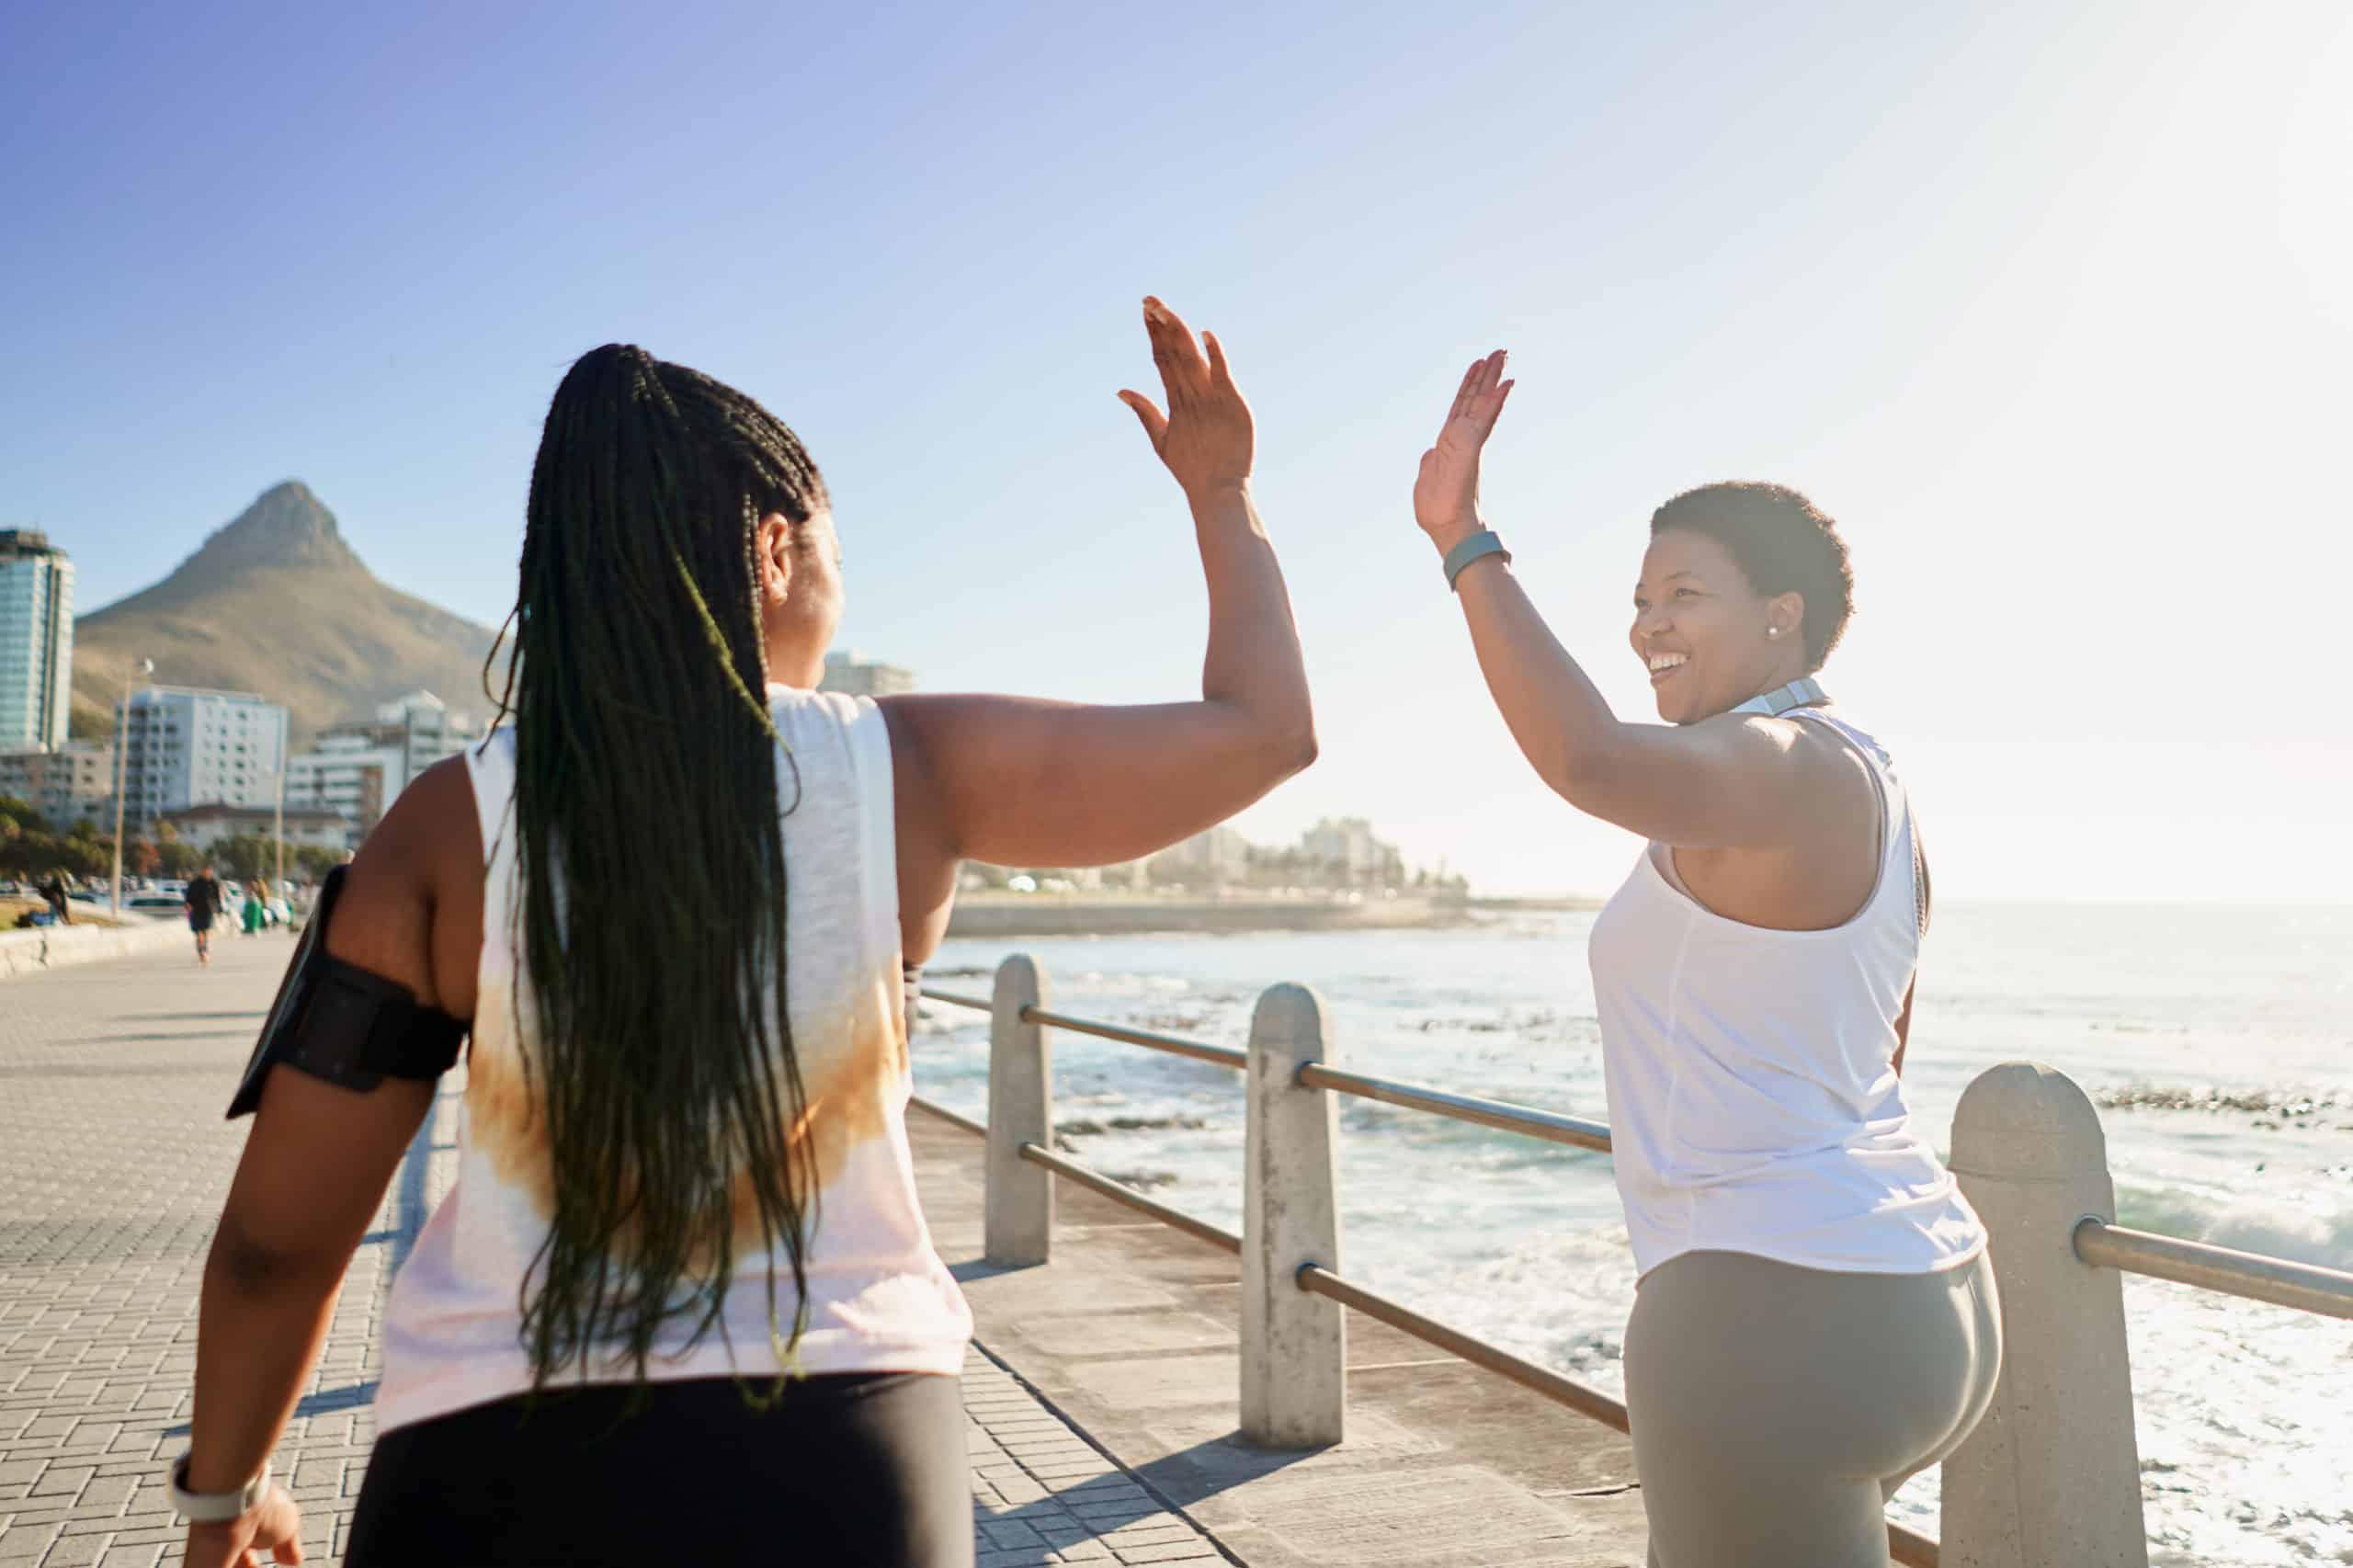 two Black fitness friends on a seaside boardwalk encourage and support each other during a summer outdoor workout. They are happy and confident and are wearing activity clothes and wearable tech.